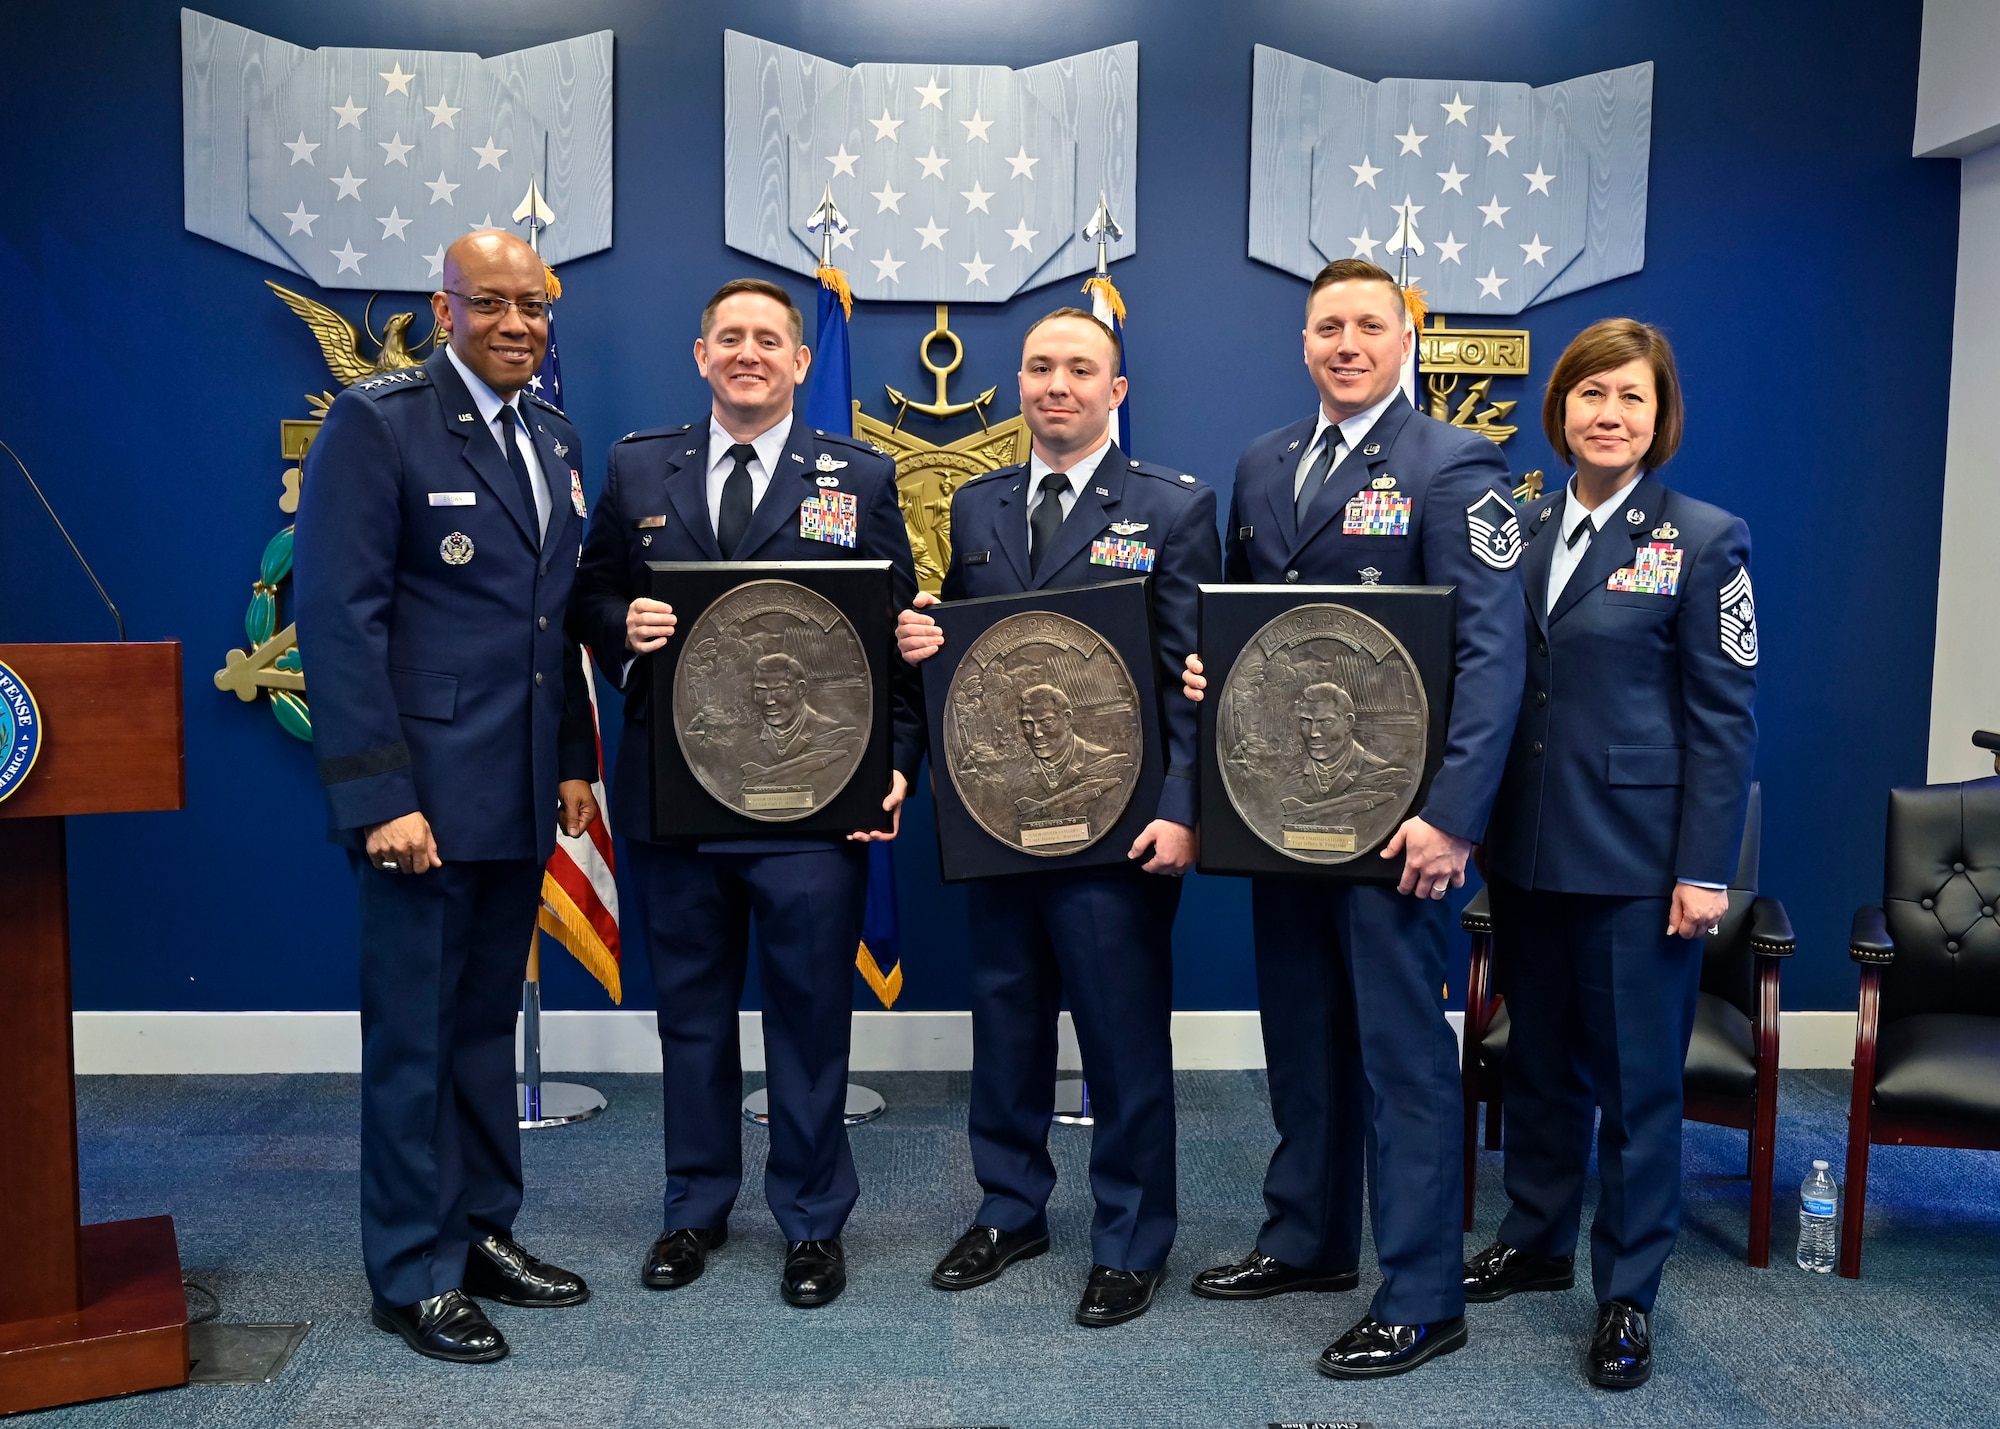 Air Force Chief of Staff Gen. CQ Brown, Jr. and Chief Master Sgt. of the Air Force JoAnne S. Bass pose with Col. Carl Miller, second from left, Lt. Col. Justin Burrier and Master Sgt. Jeffrey Fitzgerald, recipients of the 2019 Lance P. Sijan USAF Leadership Awards, during a ceremony at the Pentagon, Arlington, Va., April 3, 2023. The award is named for Medal of Honor recipient Capt. Lance Sijan, who died while being held as a prisoner of war during the Vietnam War. (U.S. Air Force photo by Eric Dietrich)